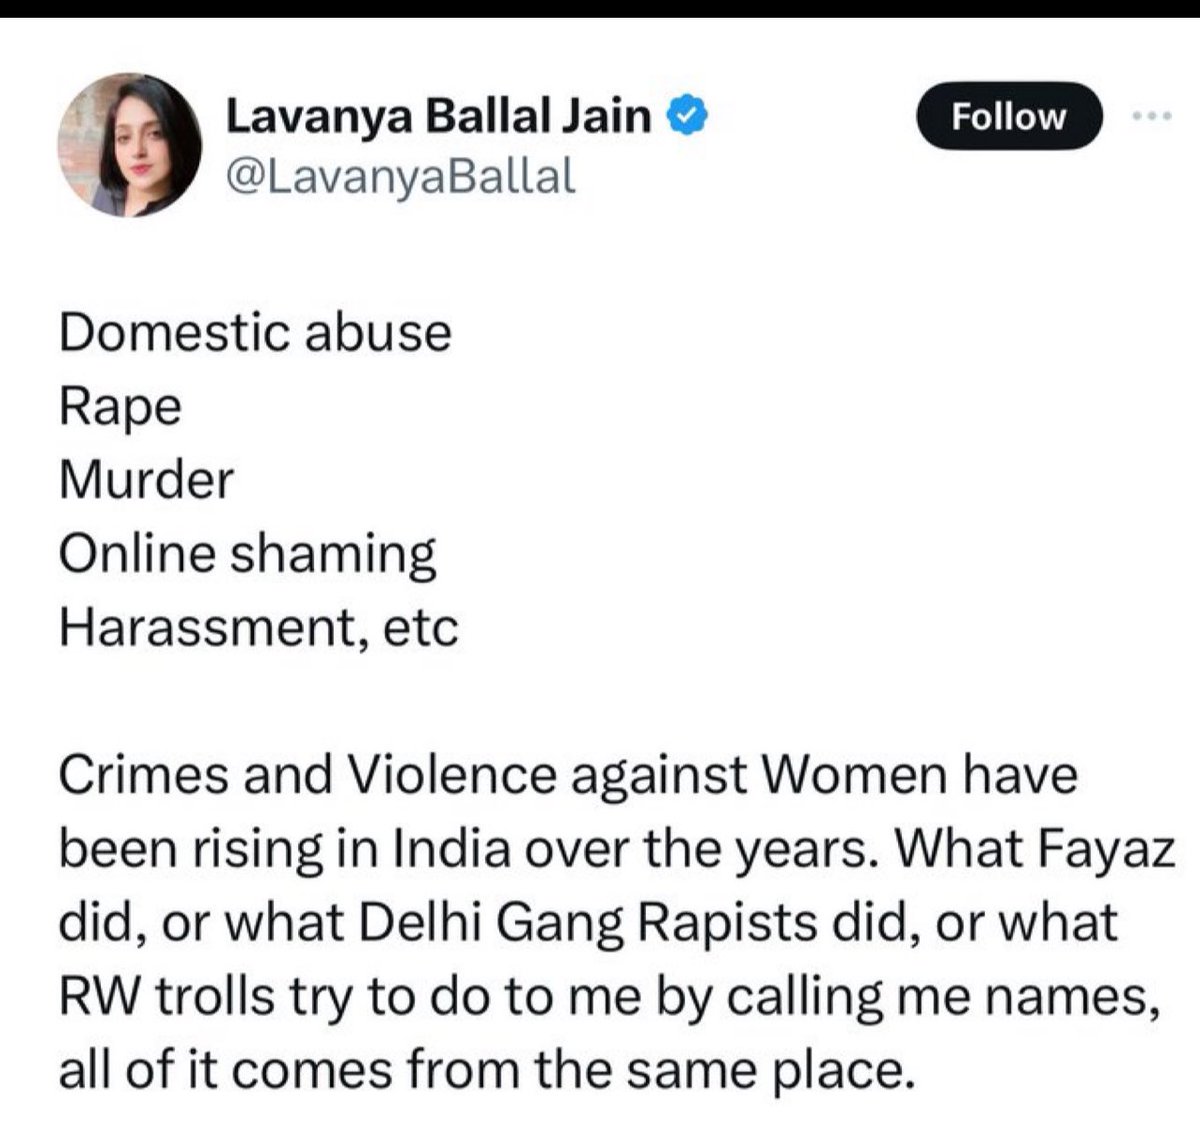 This is a very telling statement from LBJ. 
So when she likens BJP women to underwear, when her fellow party women ask Kangana for her rates, it means their thoughts like that of Nirbhaya’s rapists, comes from a filthy and depraved place.